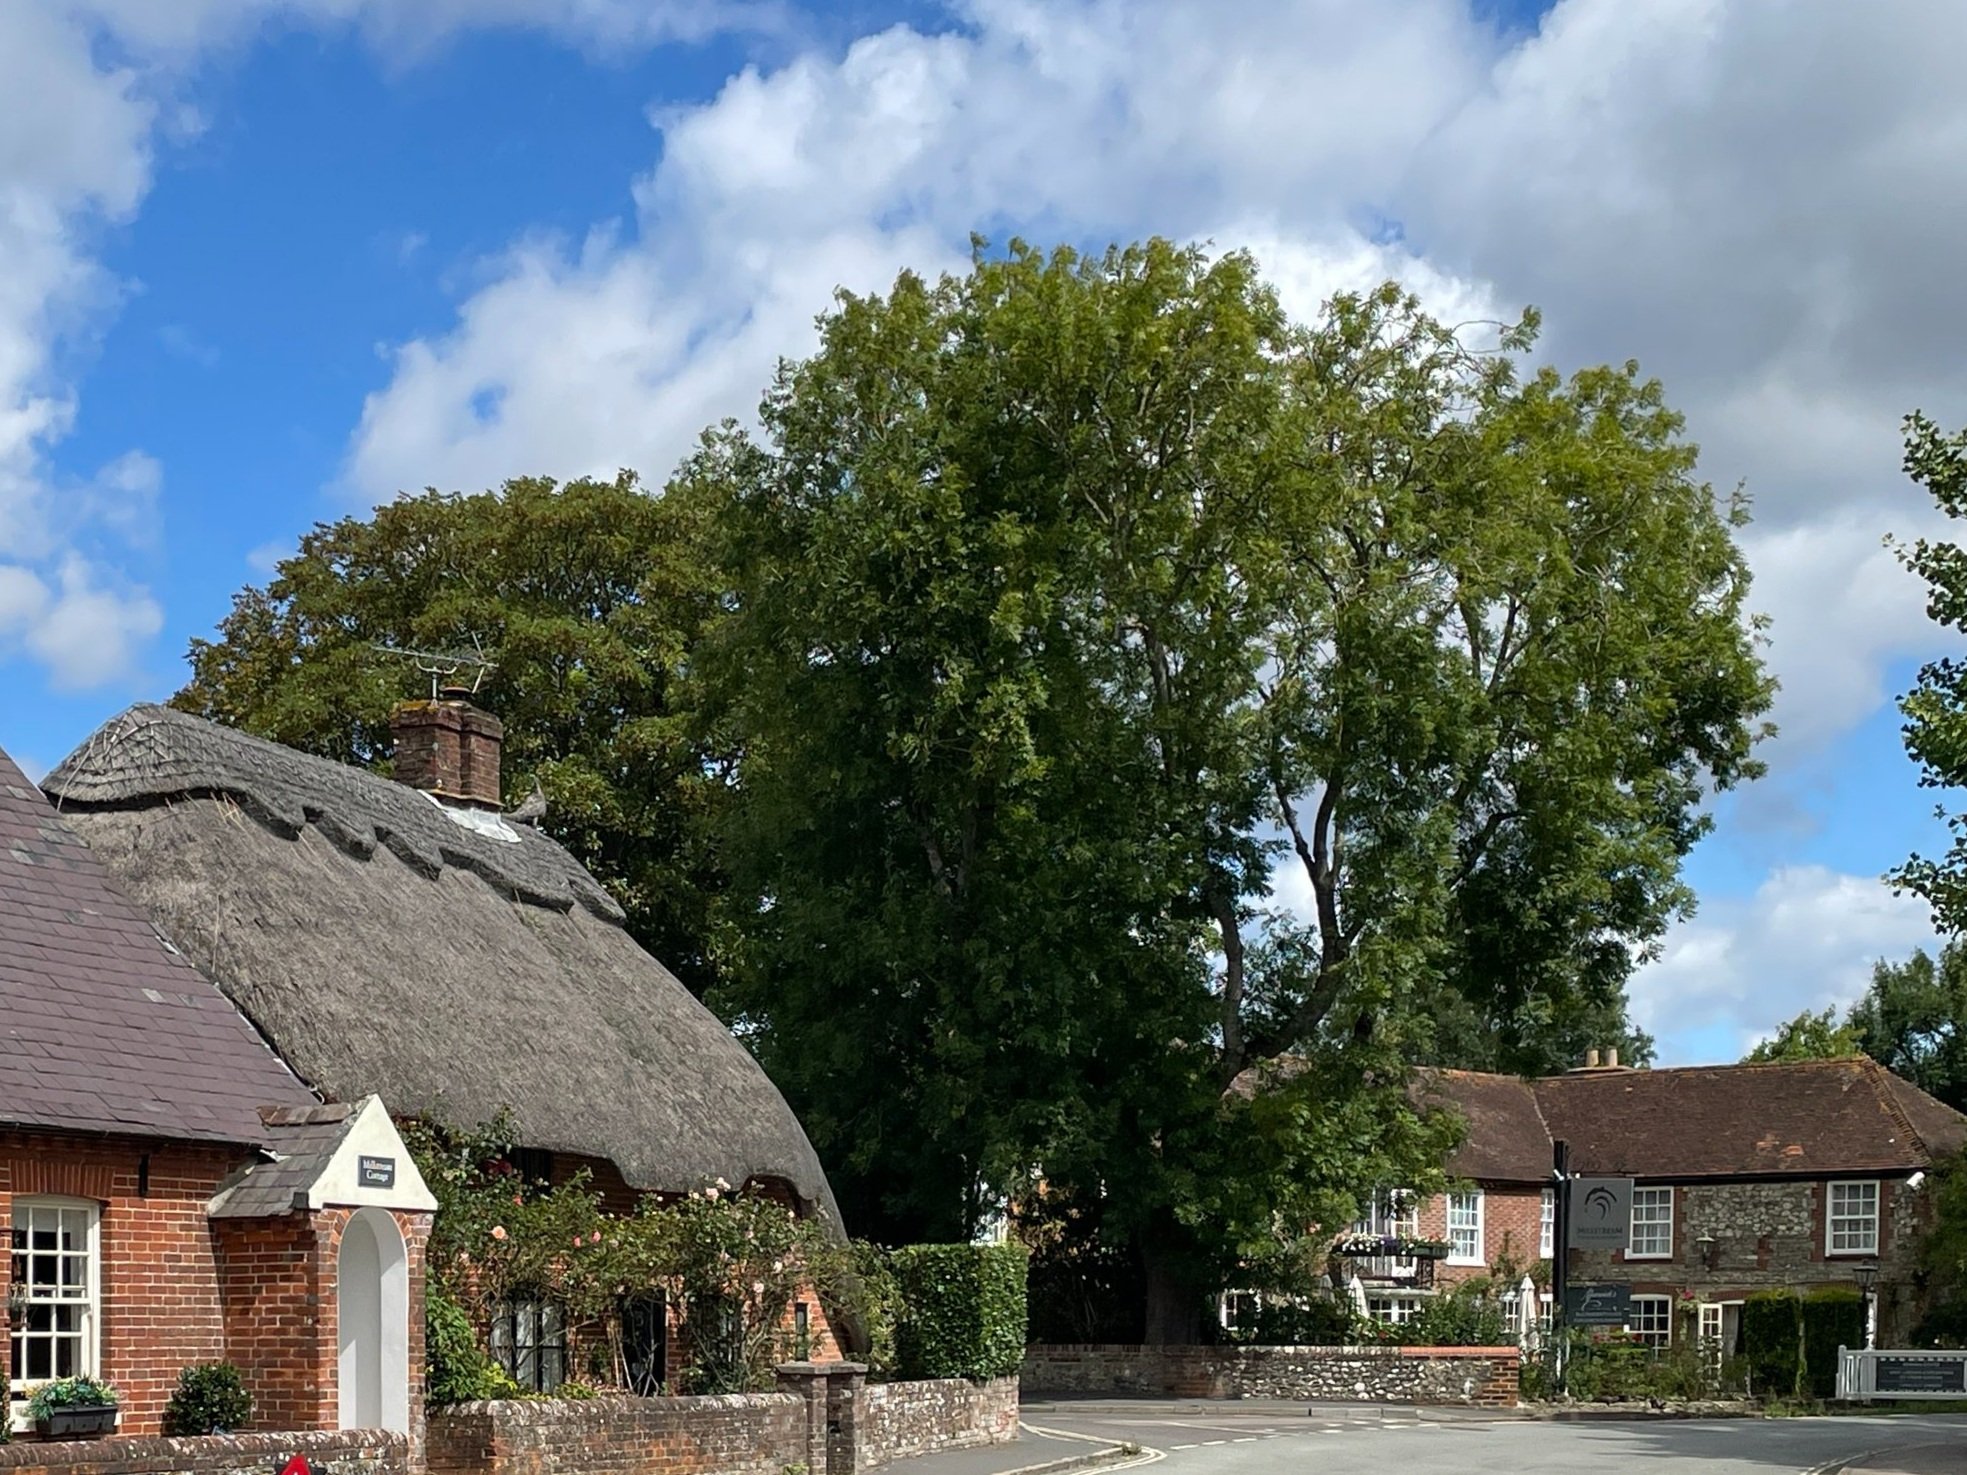  view of The Millstream Hotel, near Bosham Quay and harbour, with a traditional thatched cottage in the foreground 